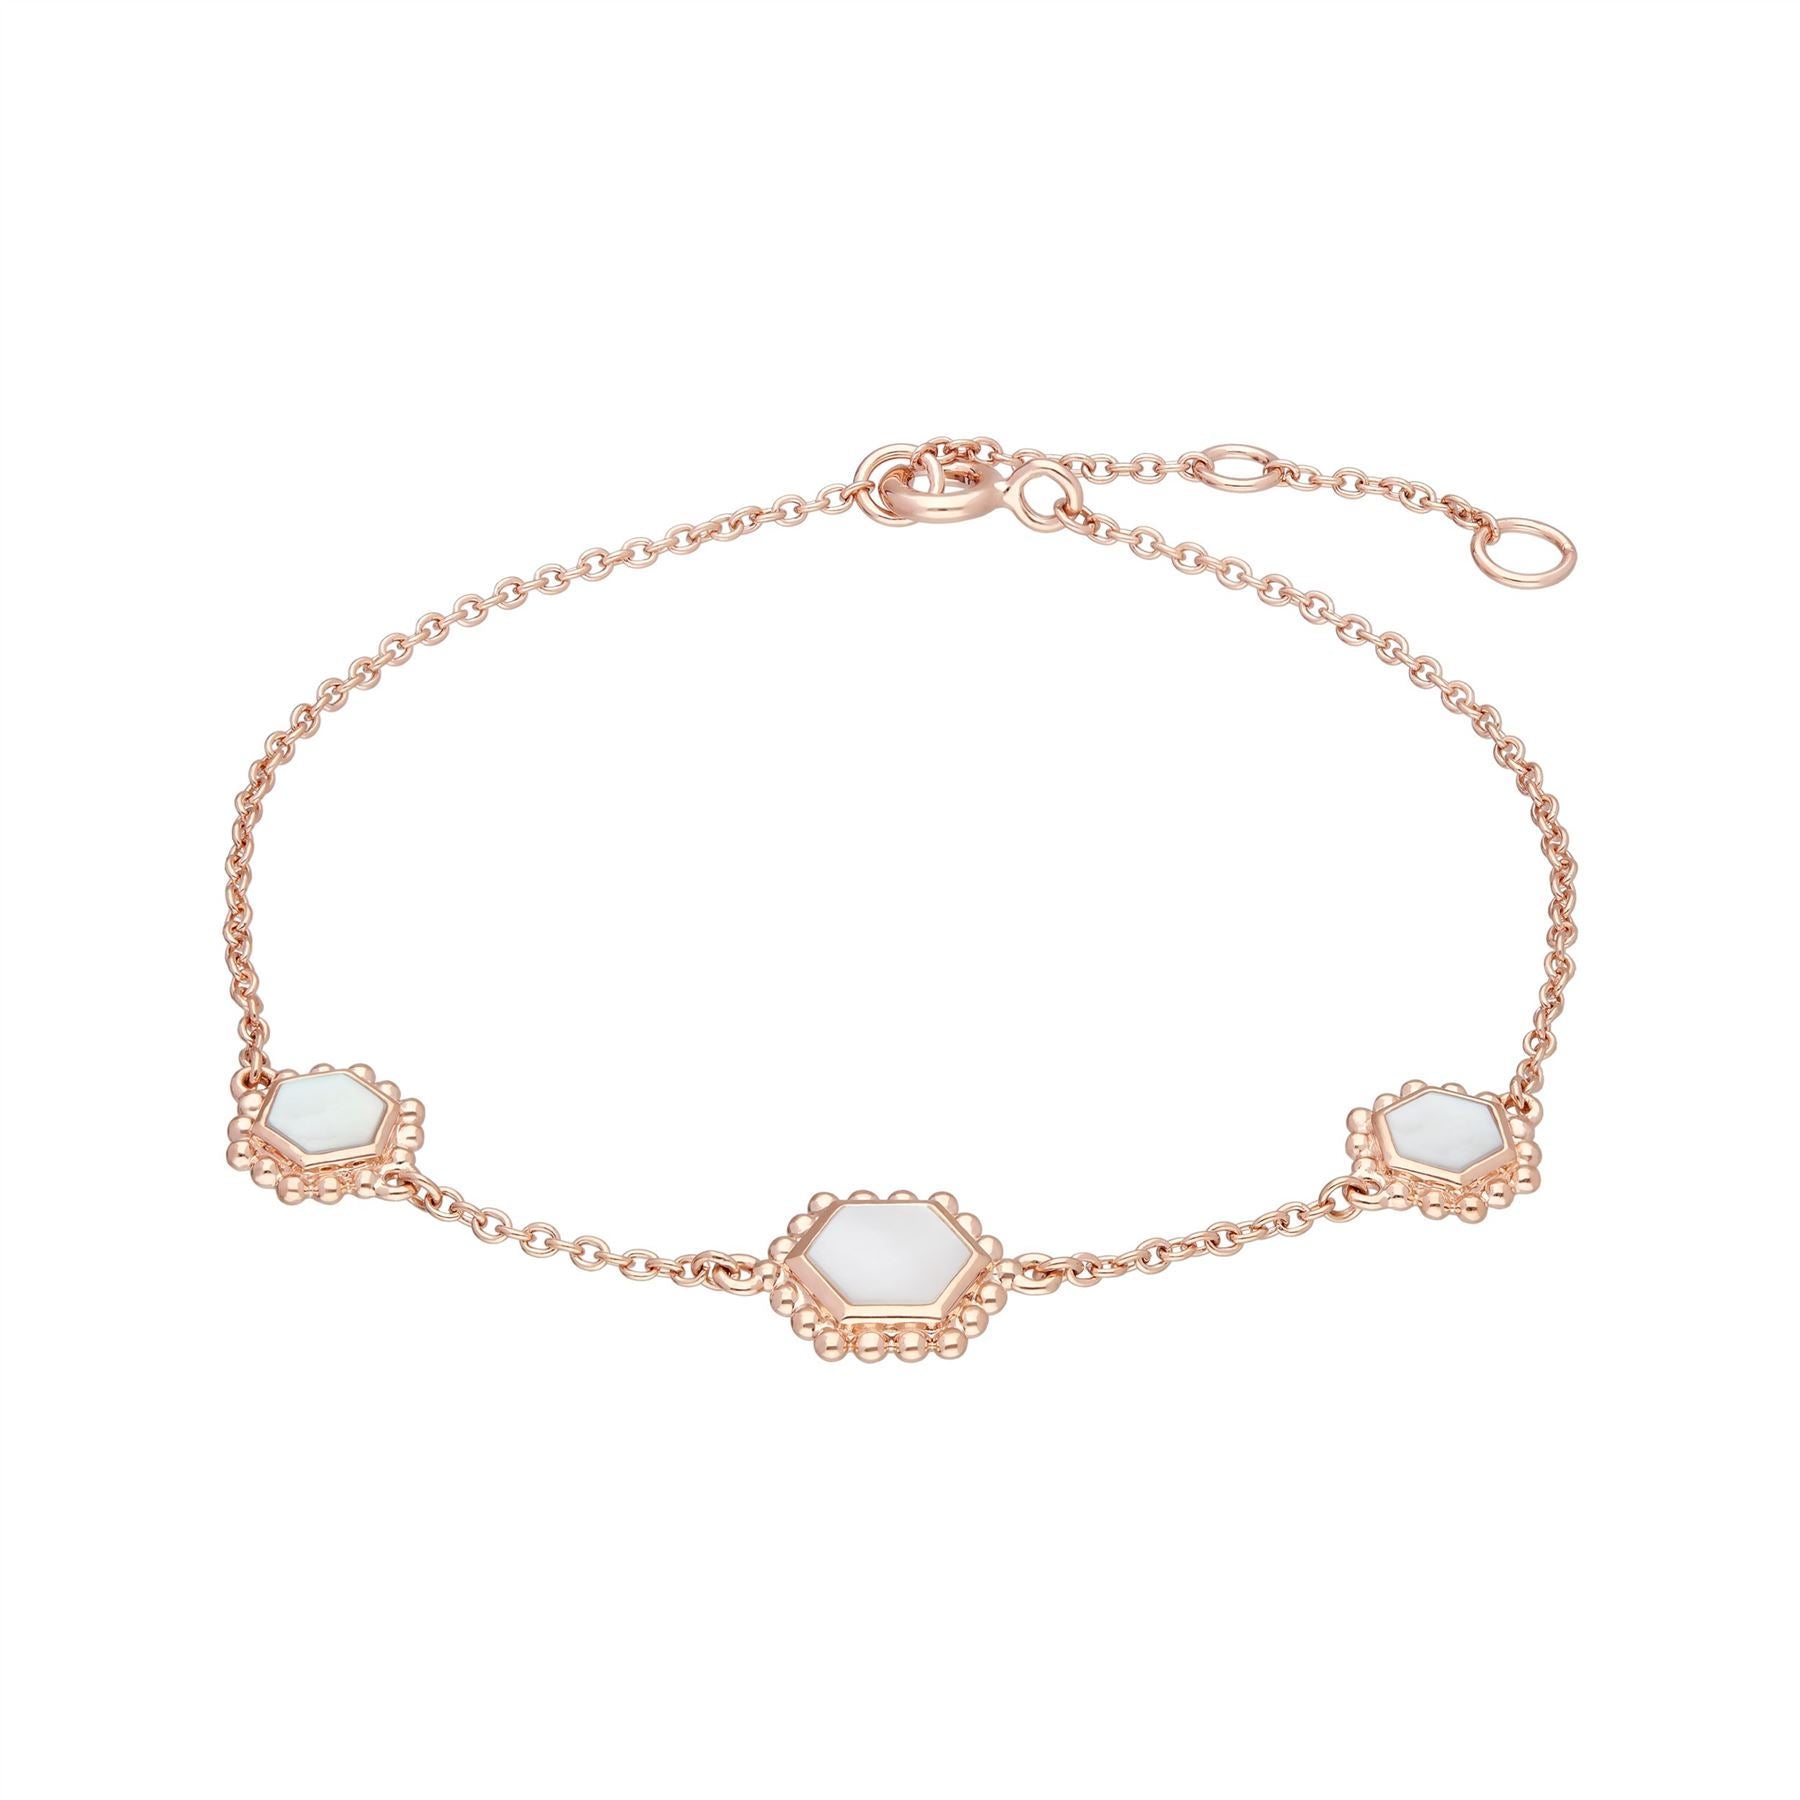 Mother of Pearl Slice Chain Bracelet in Rose Gold Plated Sterling Silver